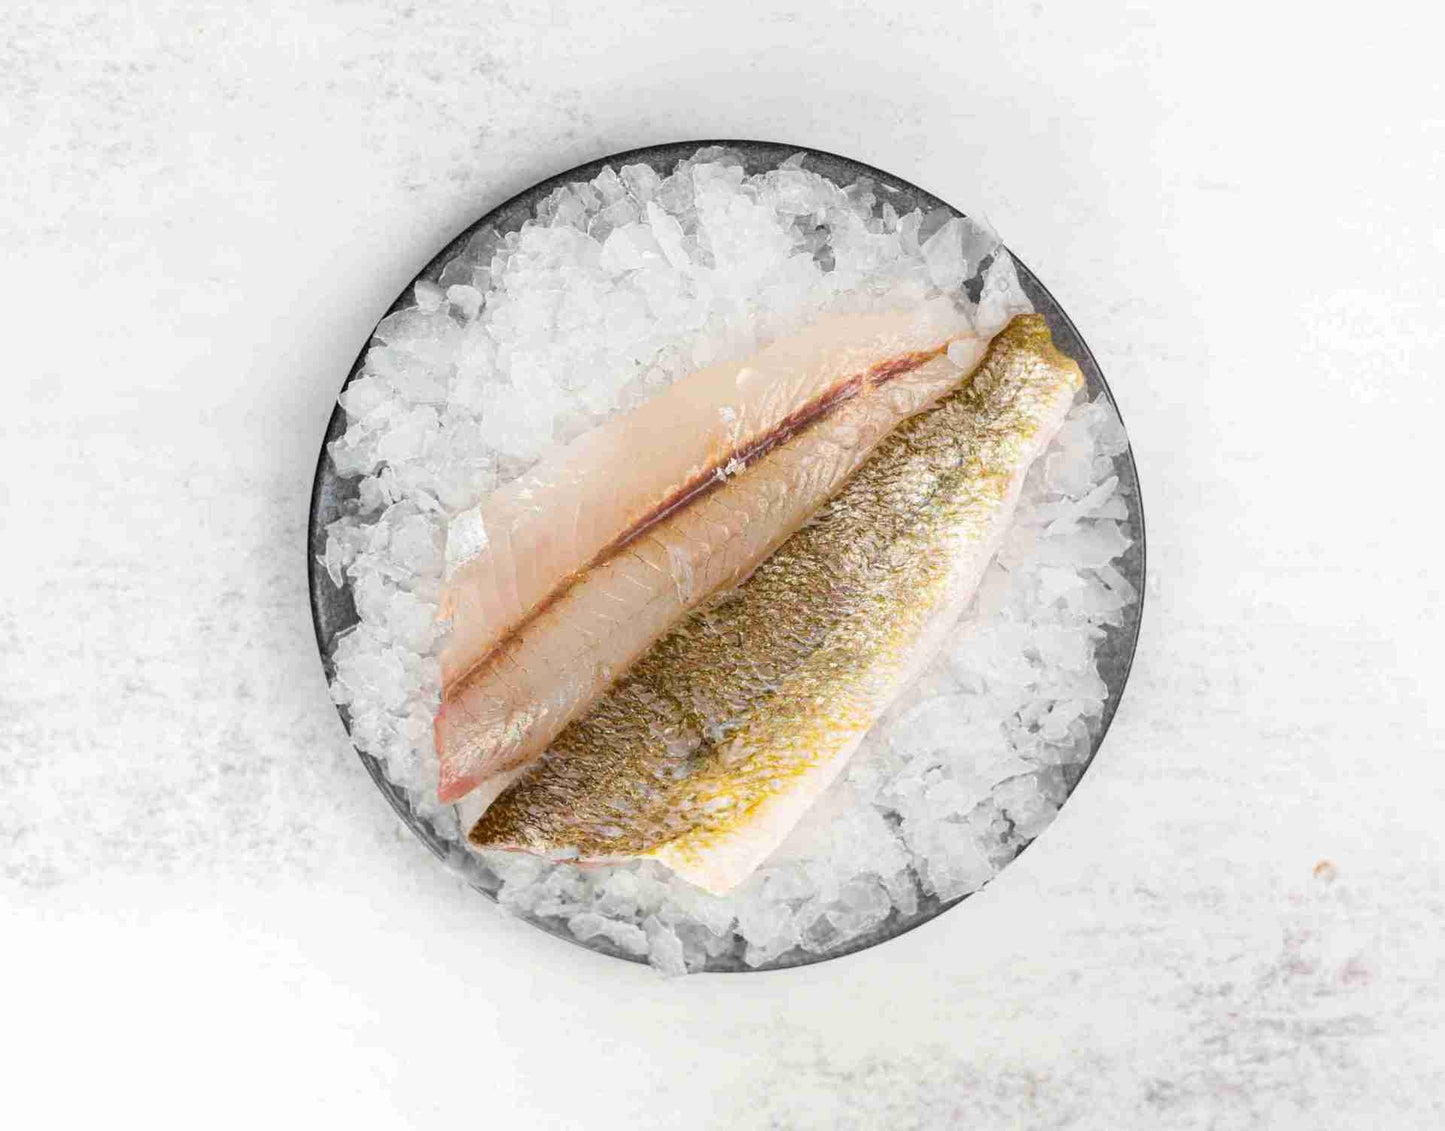 Sand Whiting Fillets 200g